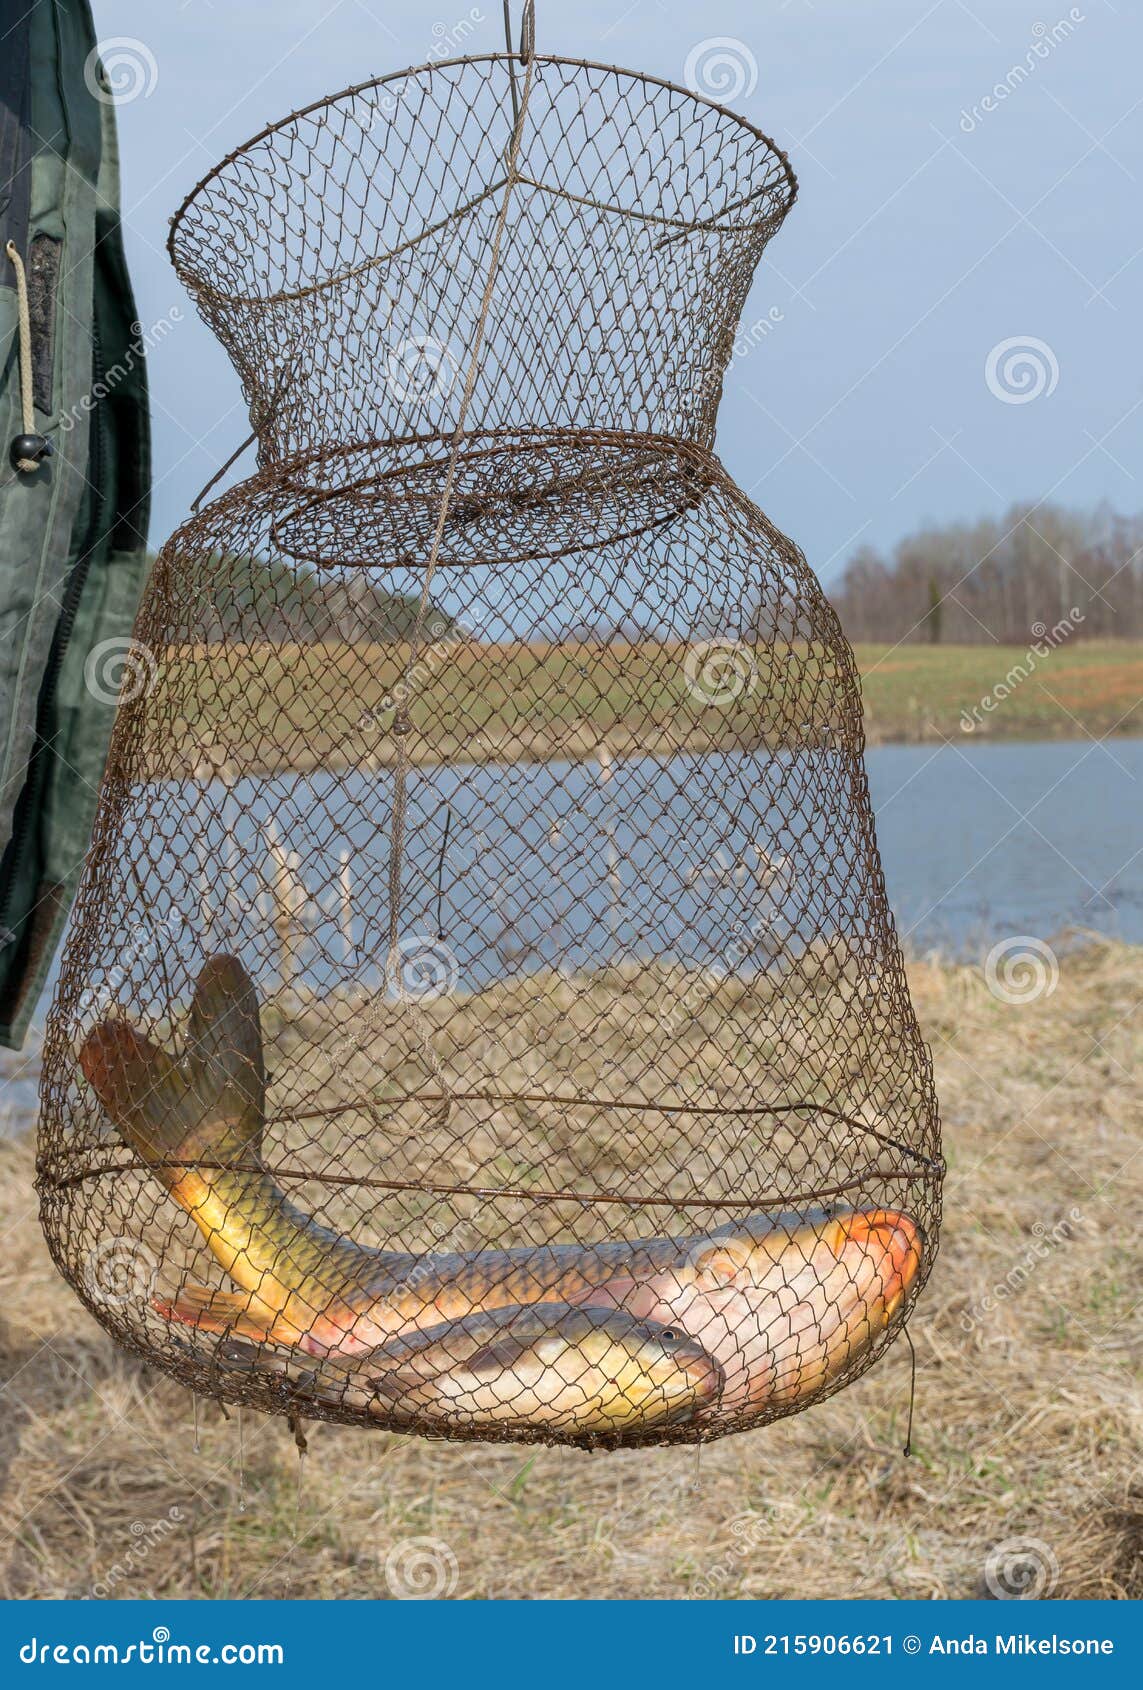 https://thumbs.dreamstime.com/z/picture-carp-caught-fish-net-fishing-as-hobby-early-spring-nature-amateur-fishing-carp-caught-fish-net-215906621.jpg